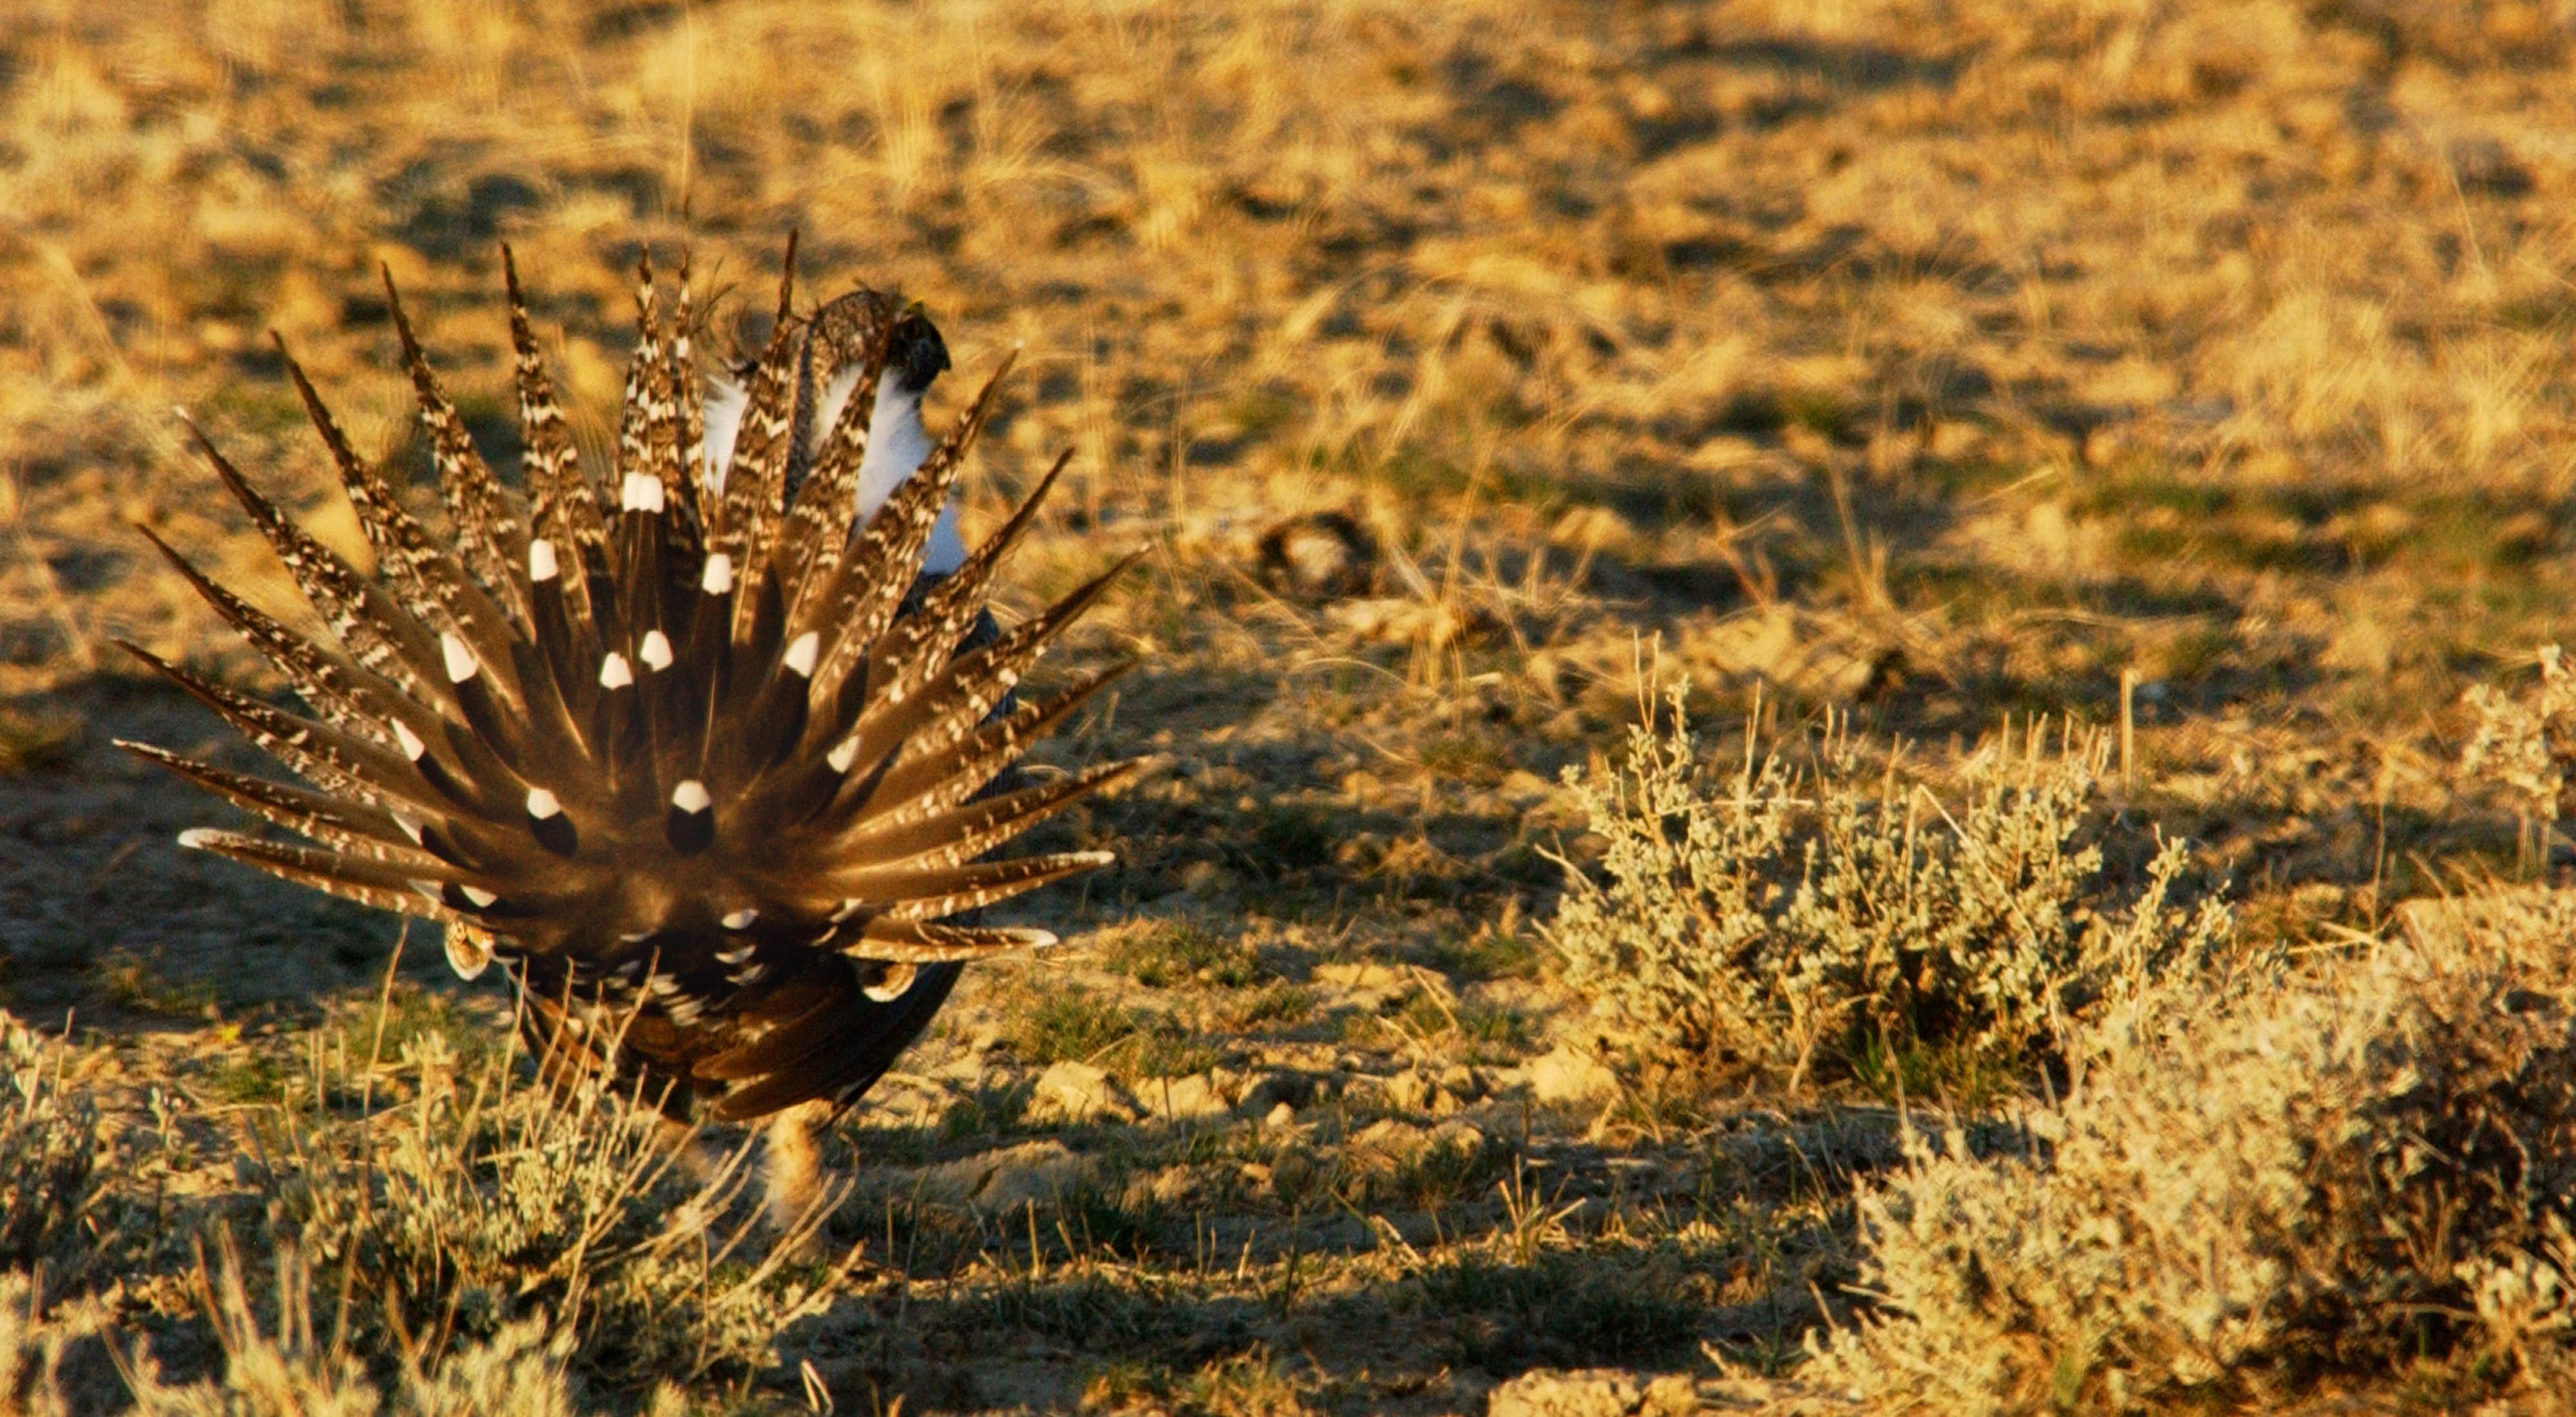 back view of a sage grouse showing it's feathers